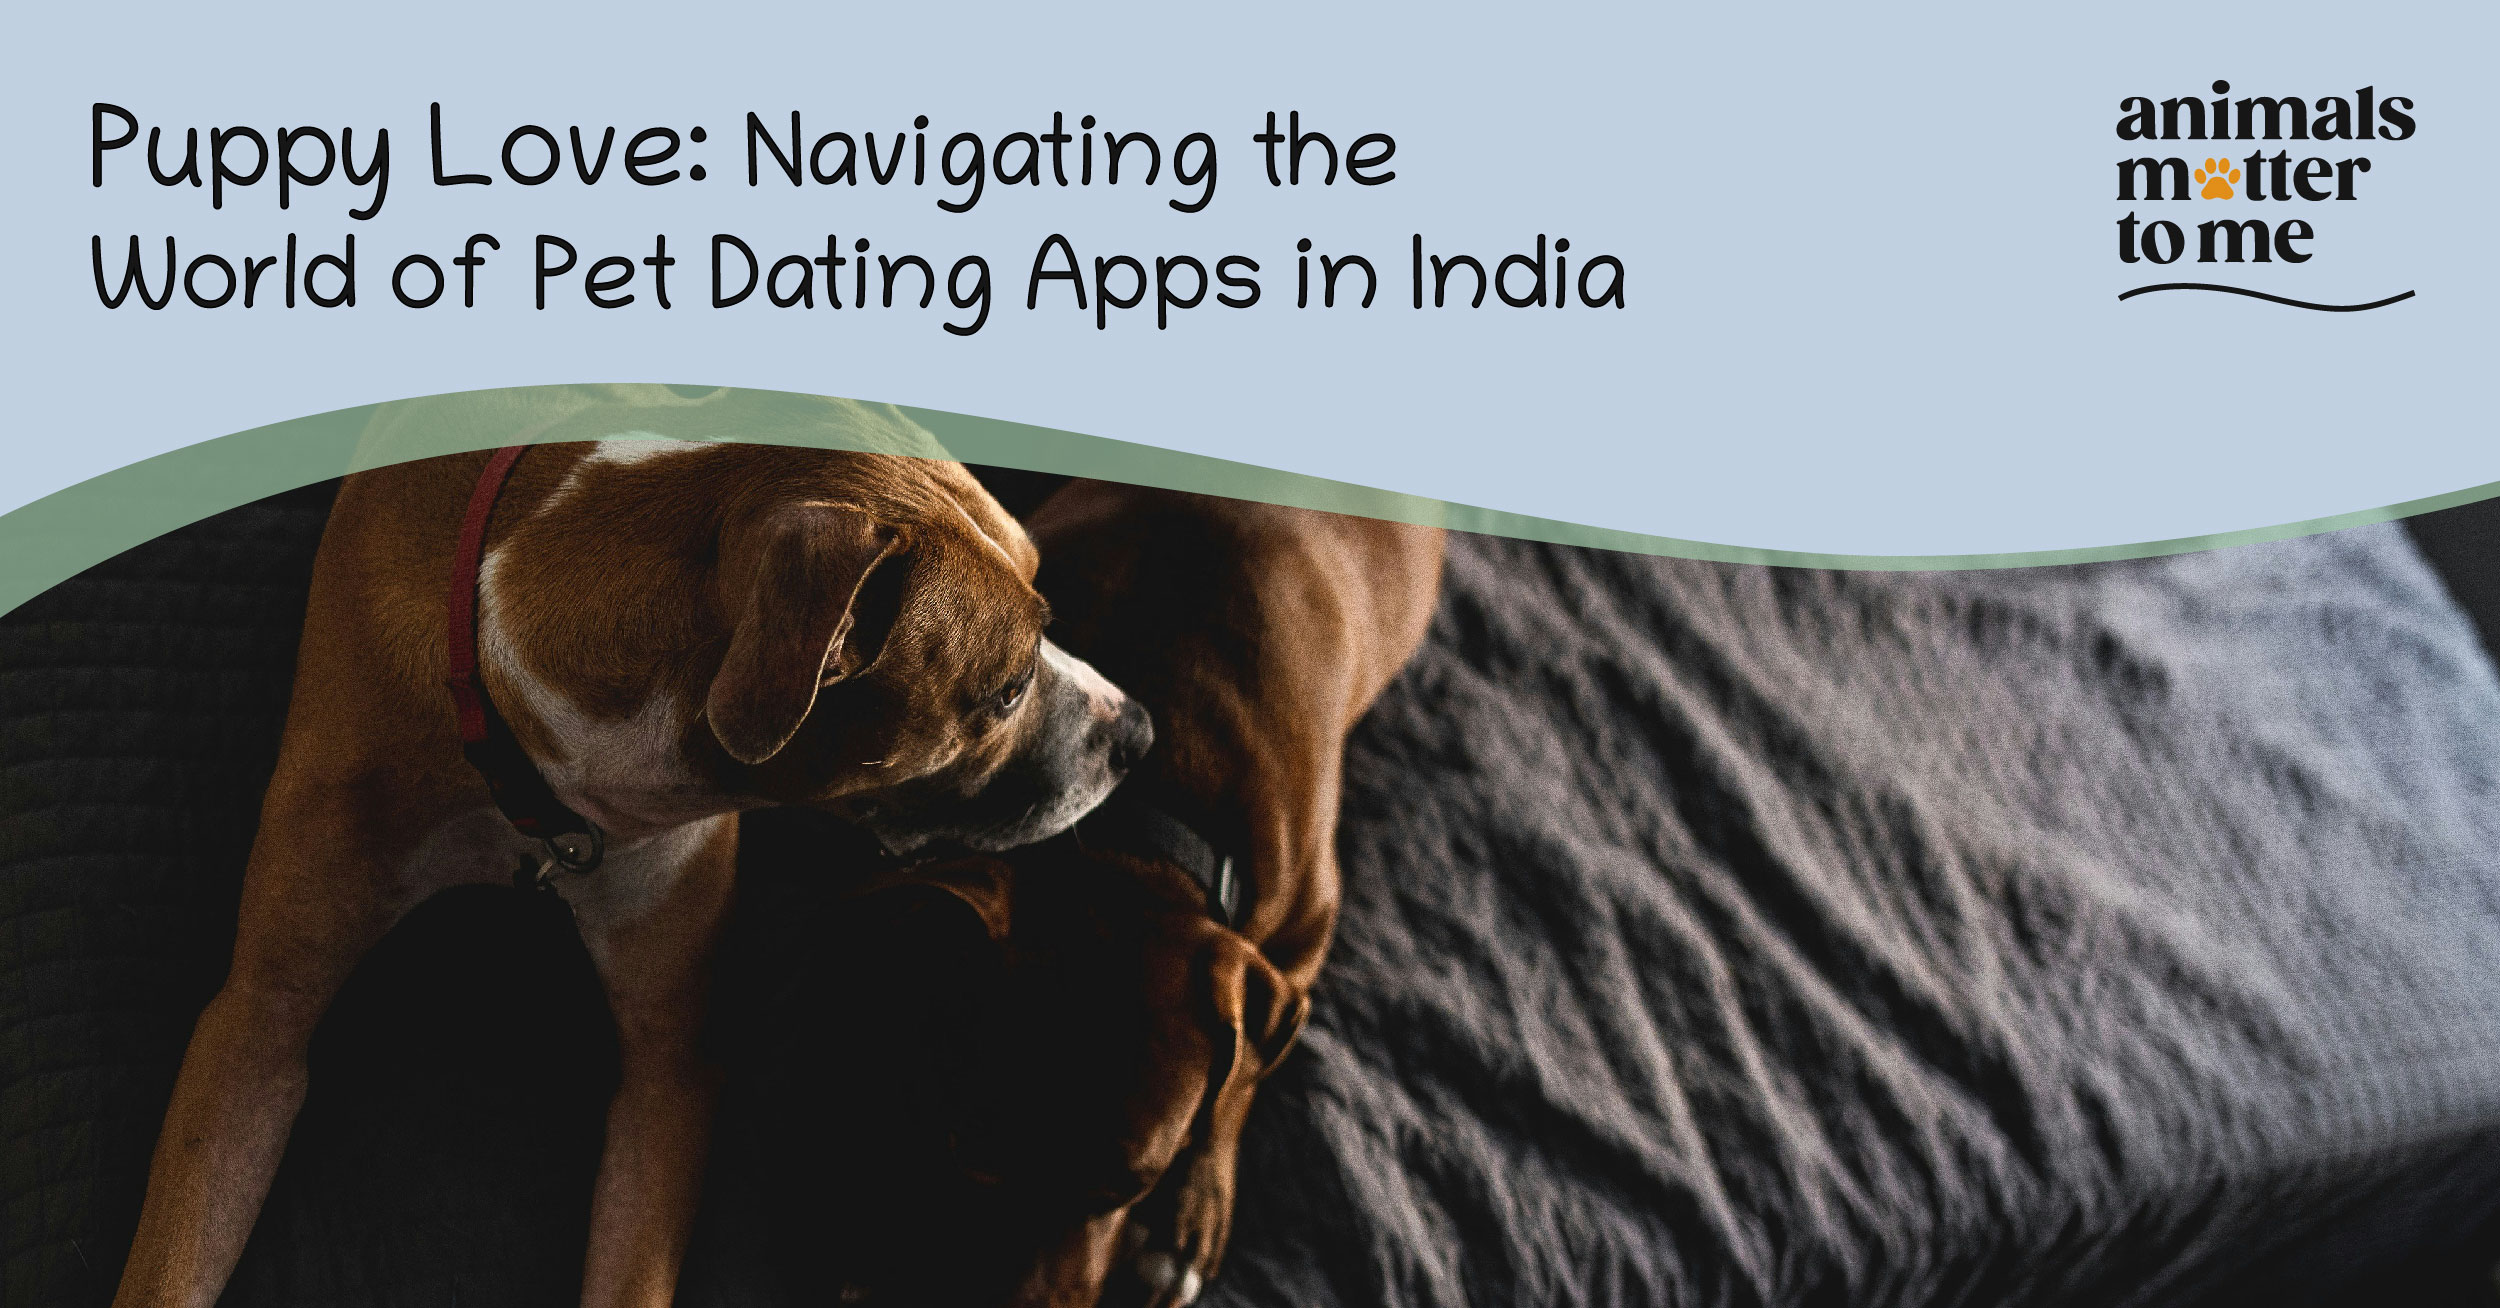 Puppy Love: Navigating the World of Pet Dating Apps in India